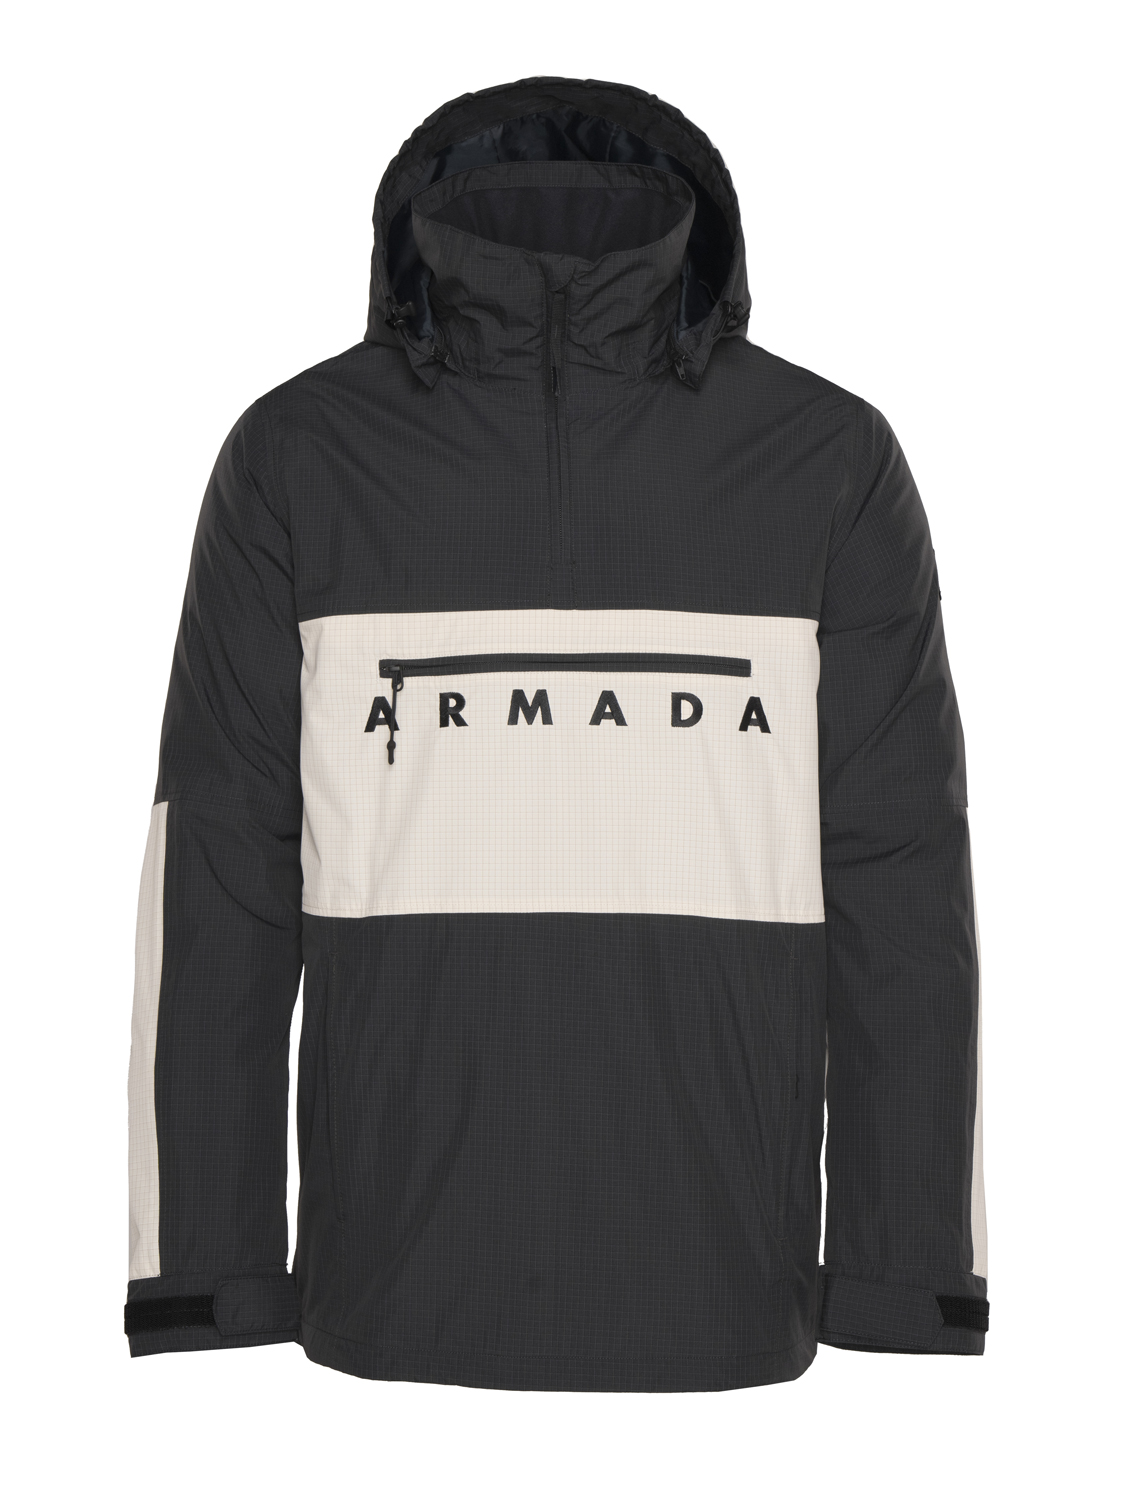 Armada Skis – What skiing will become.